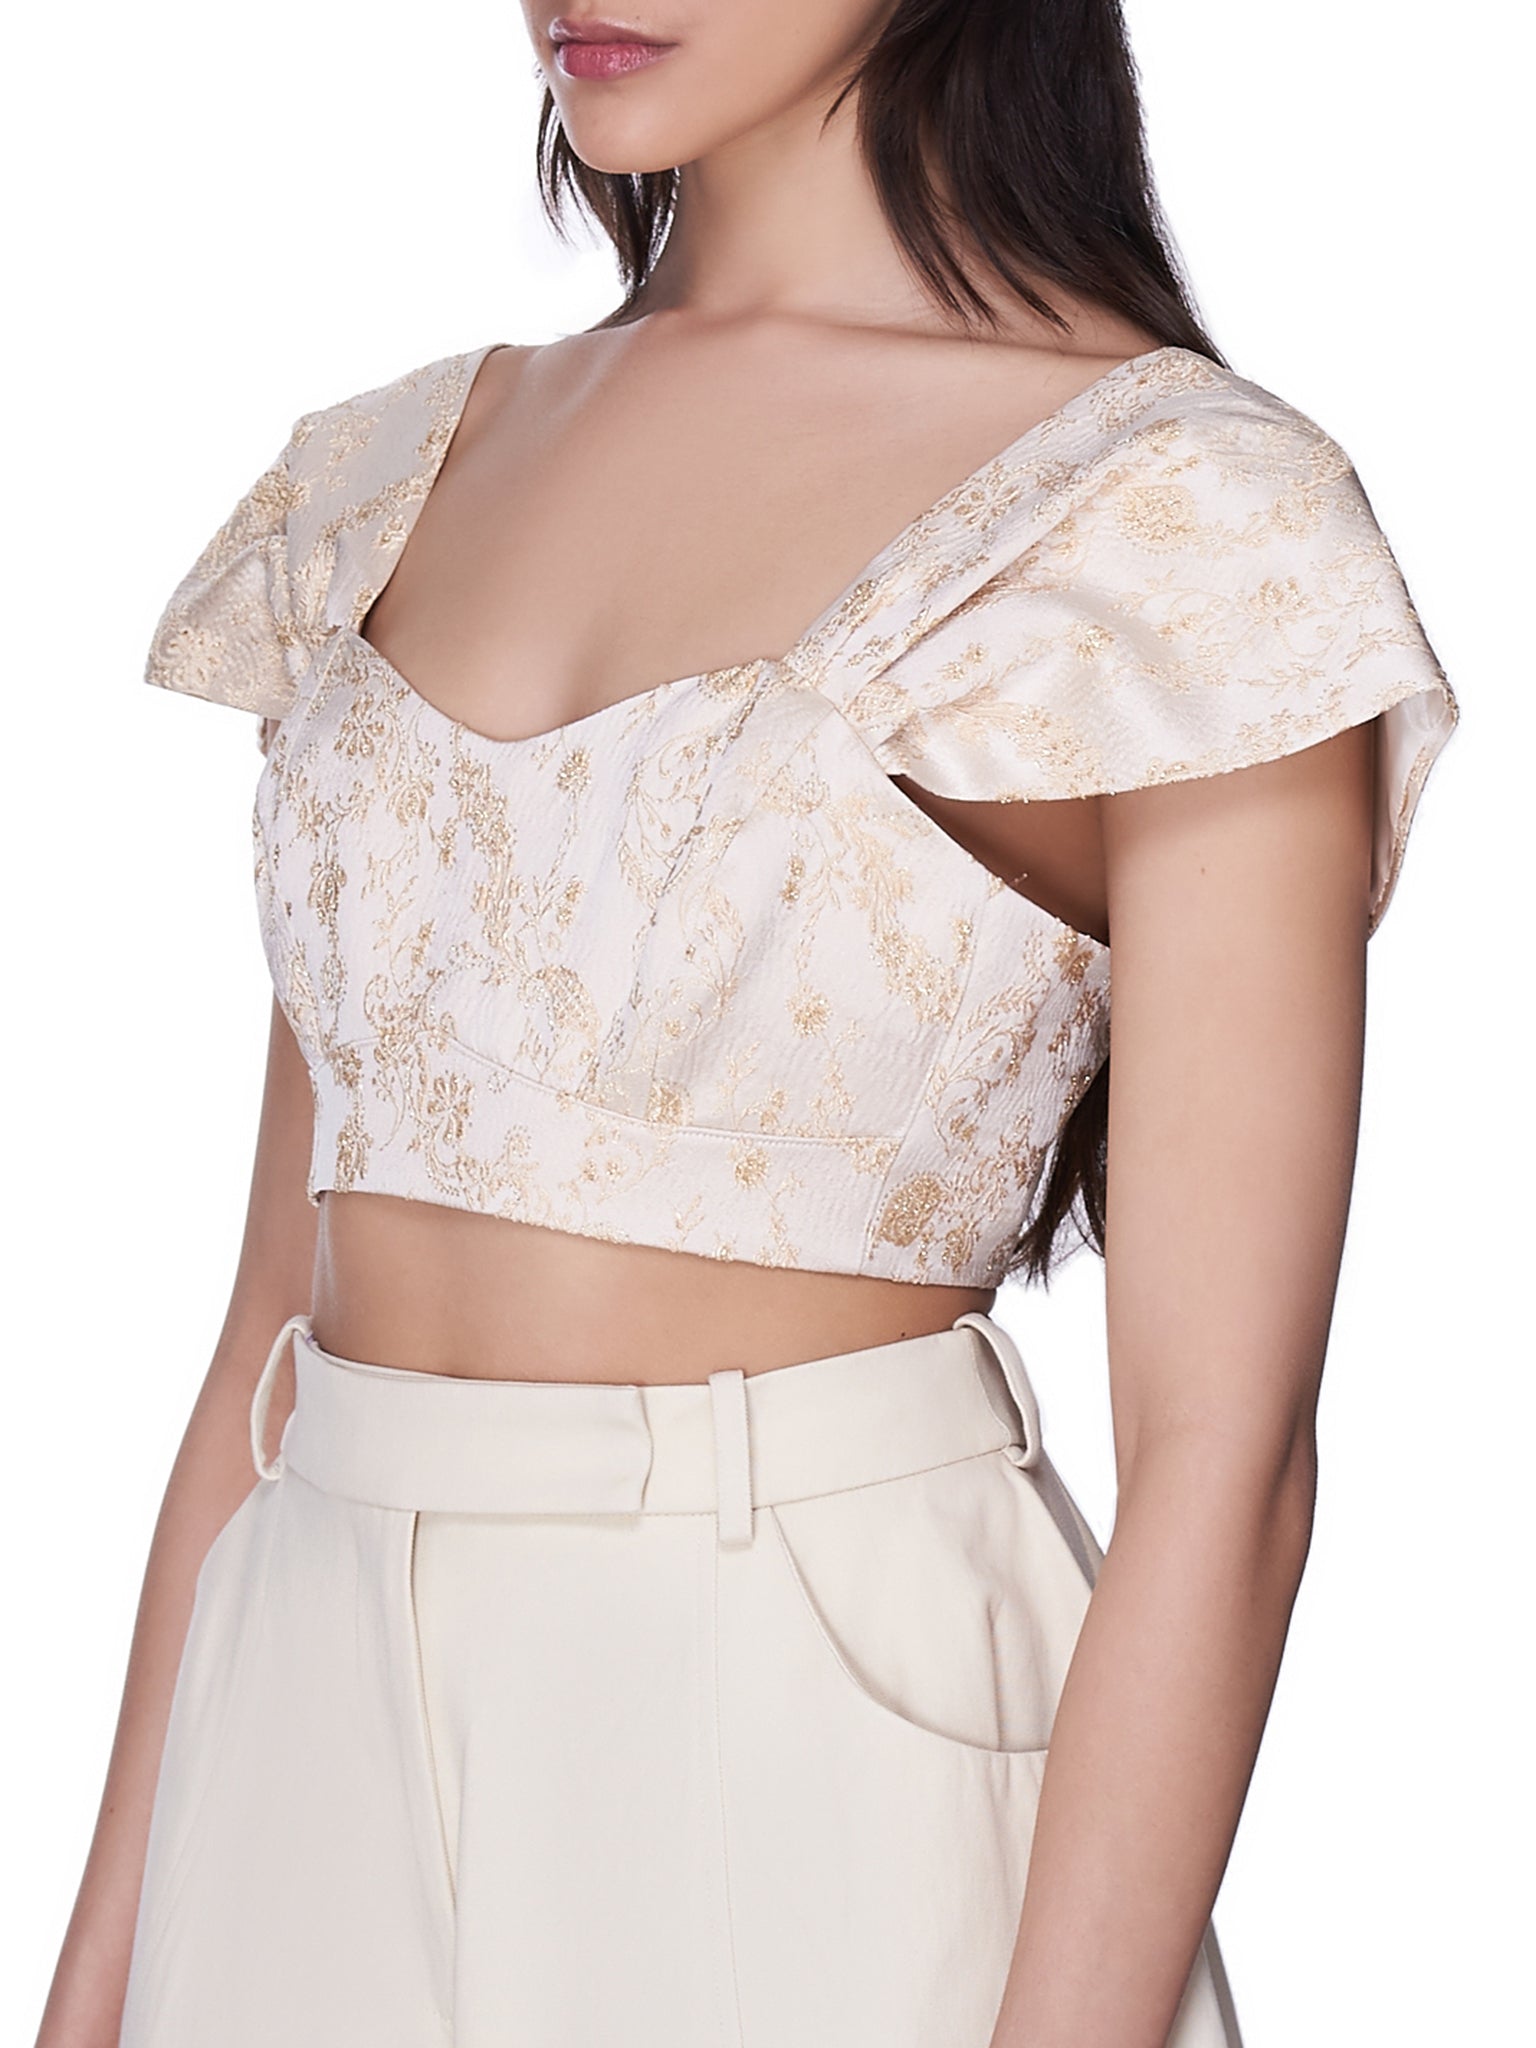 Bustier Cropped Top (5046-0423-GOLD)